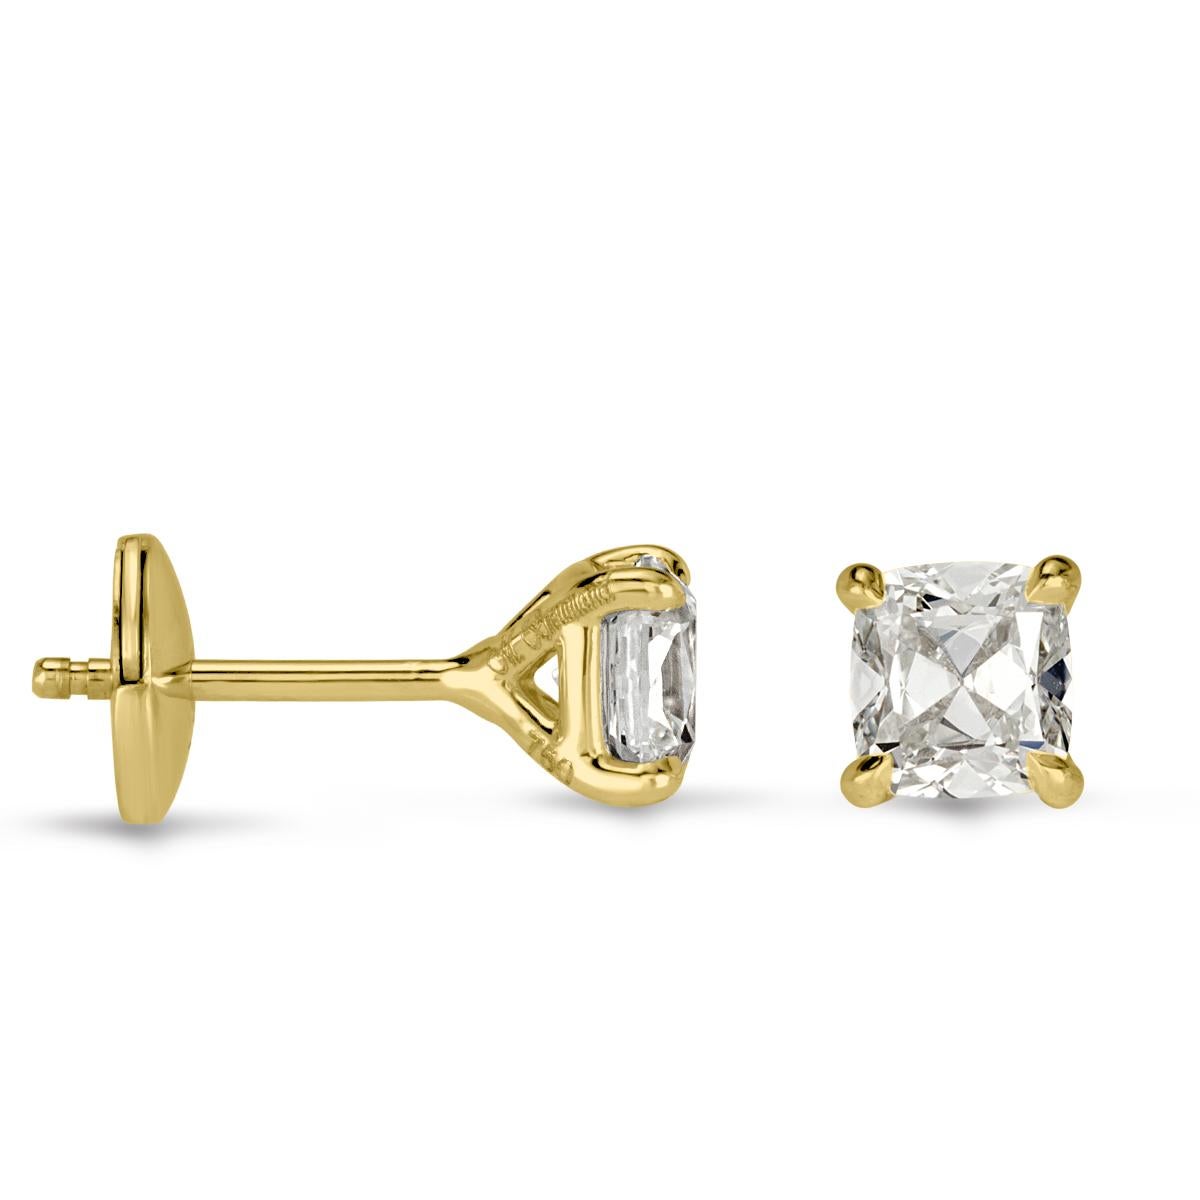 Handcrafted in 18k yellow gold, this gorgeous pair of diamond stud earrings showcases two old Mine cut diamonds graded at F-G in color, VS1-VS2 in clarity. They are truly perfect for everyday wear!
